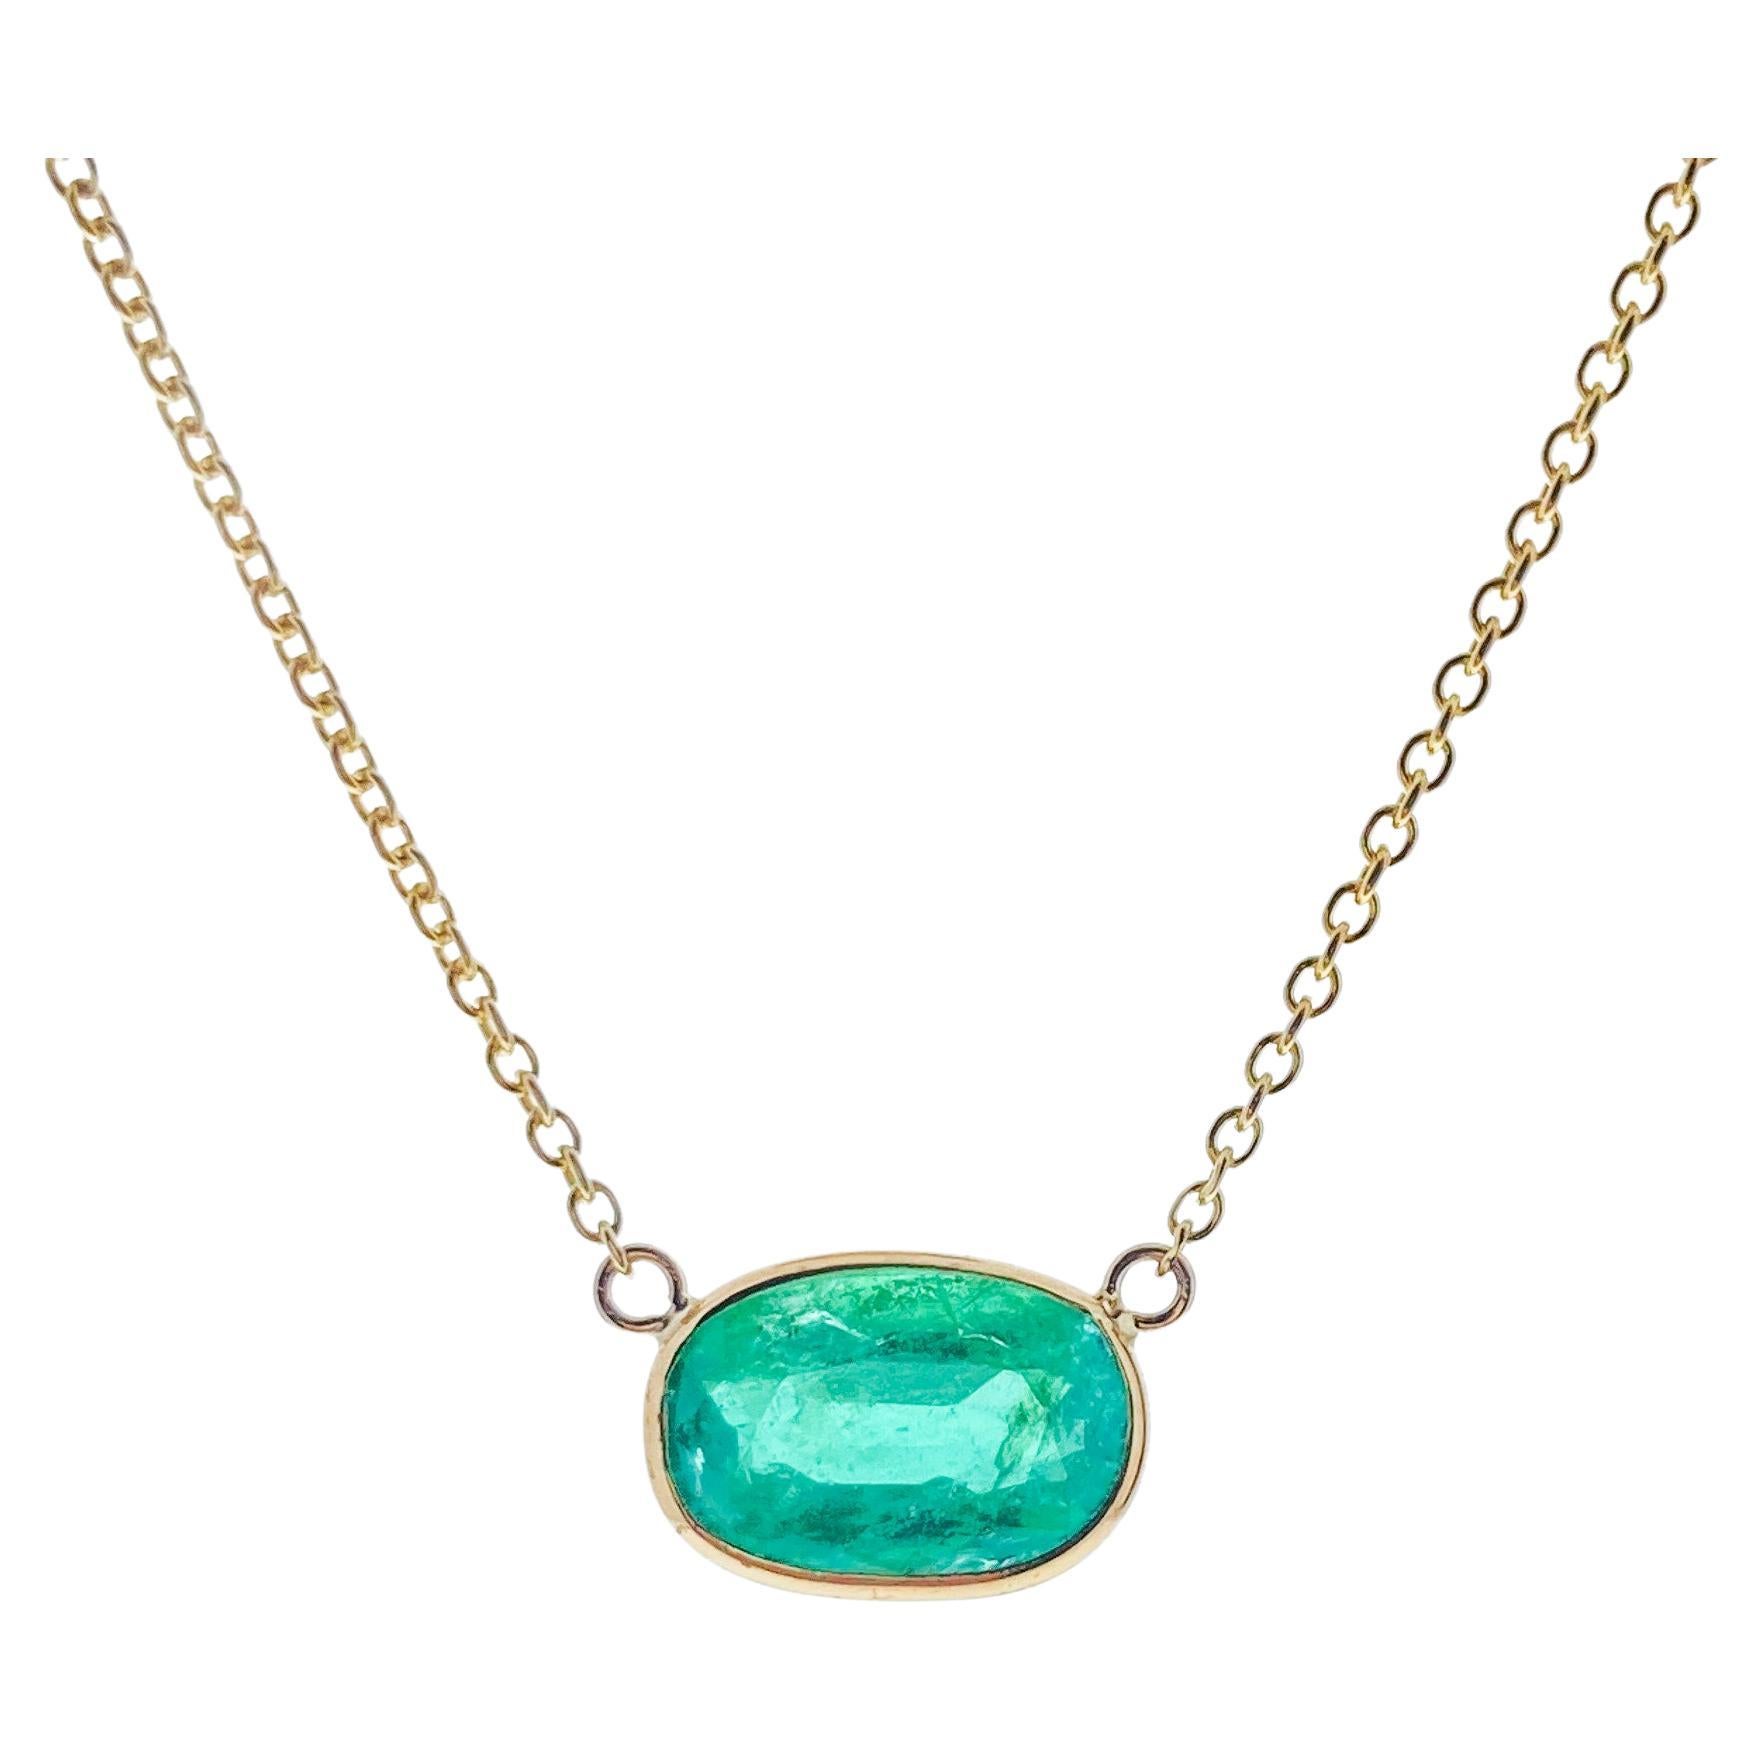 1.98 Carat Green Emerald Oval Cut Fashion Necklaces In 14K Yellow Gold